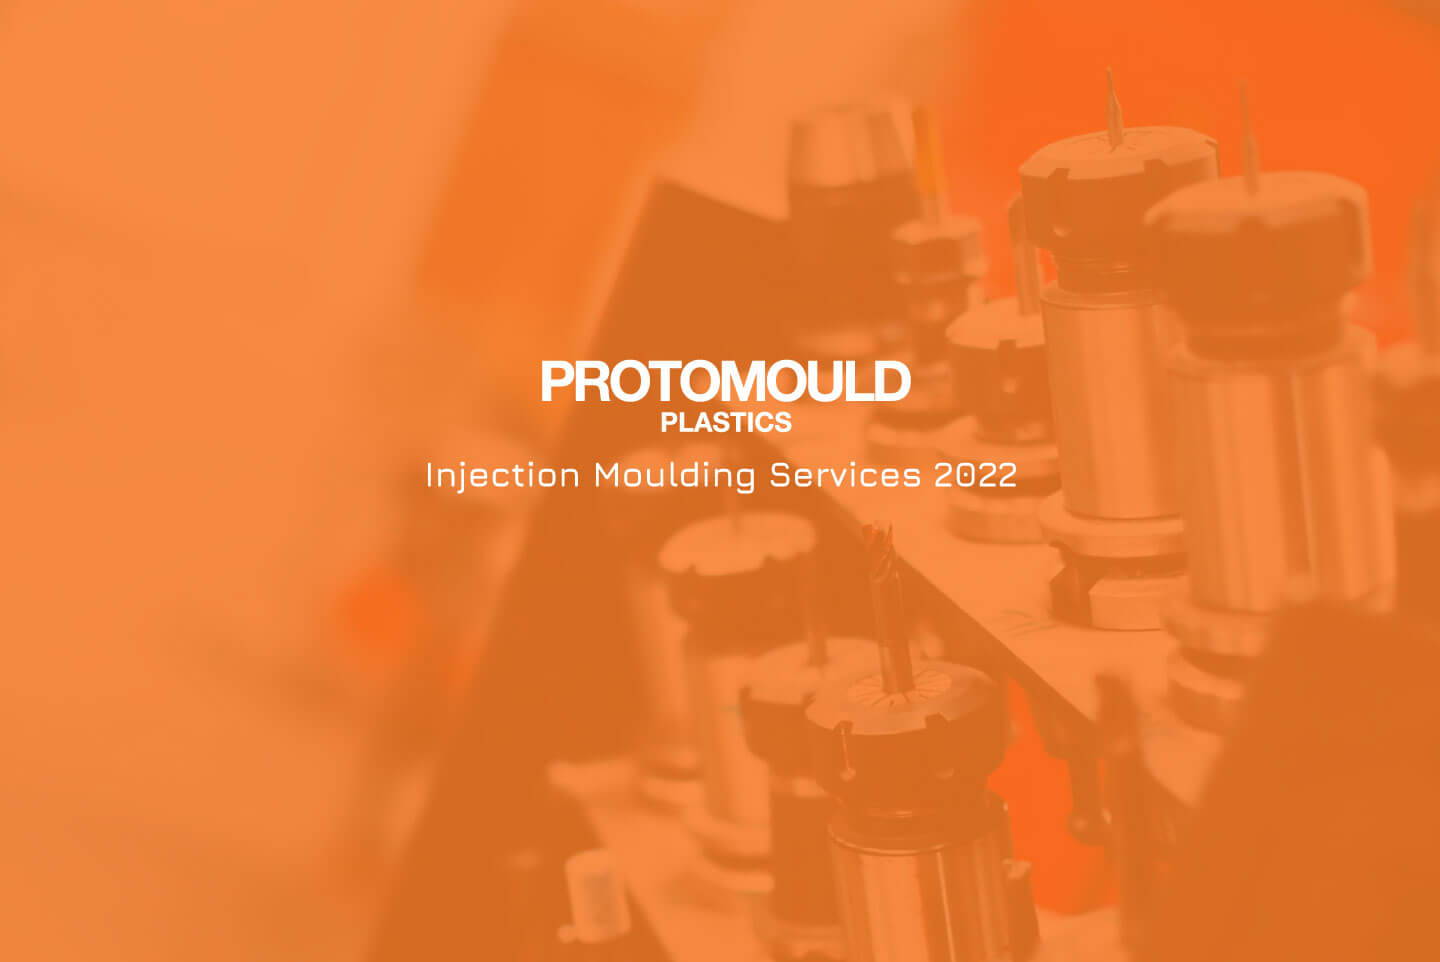 Injection Moulding Services 2022